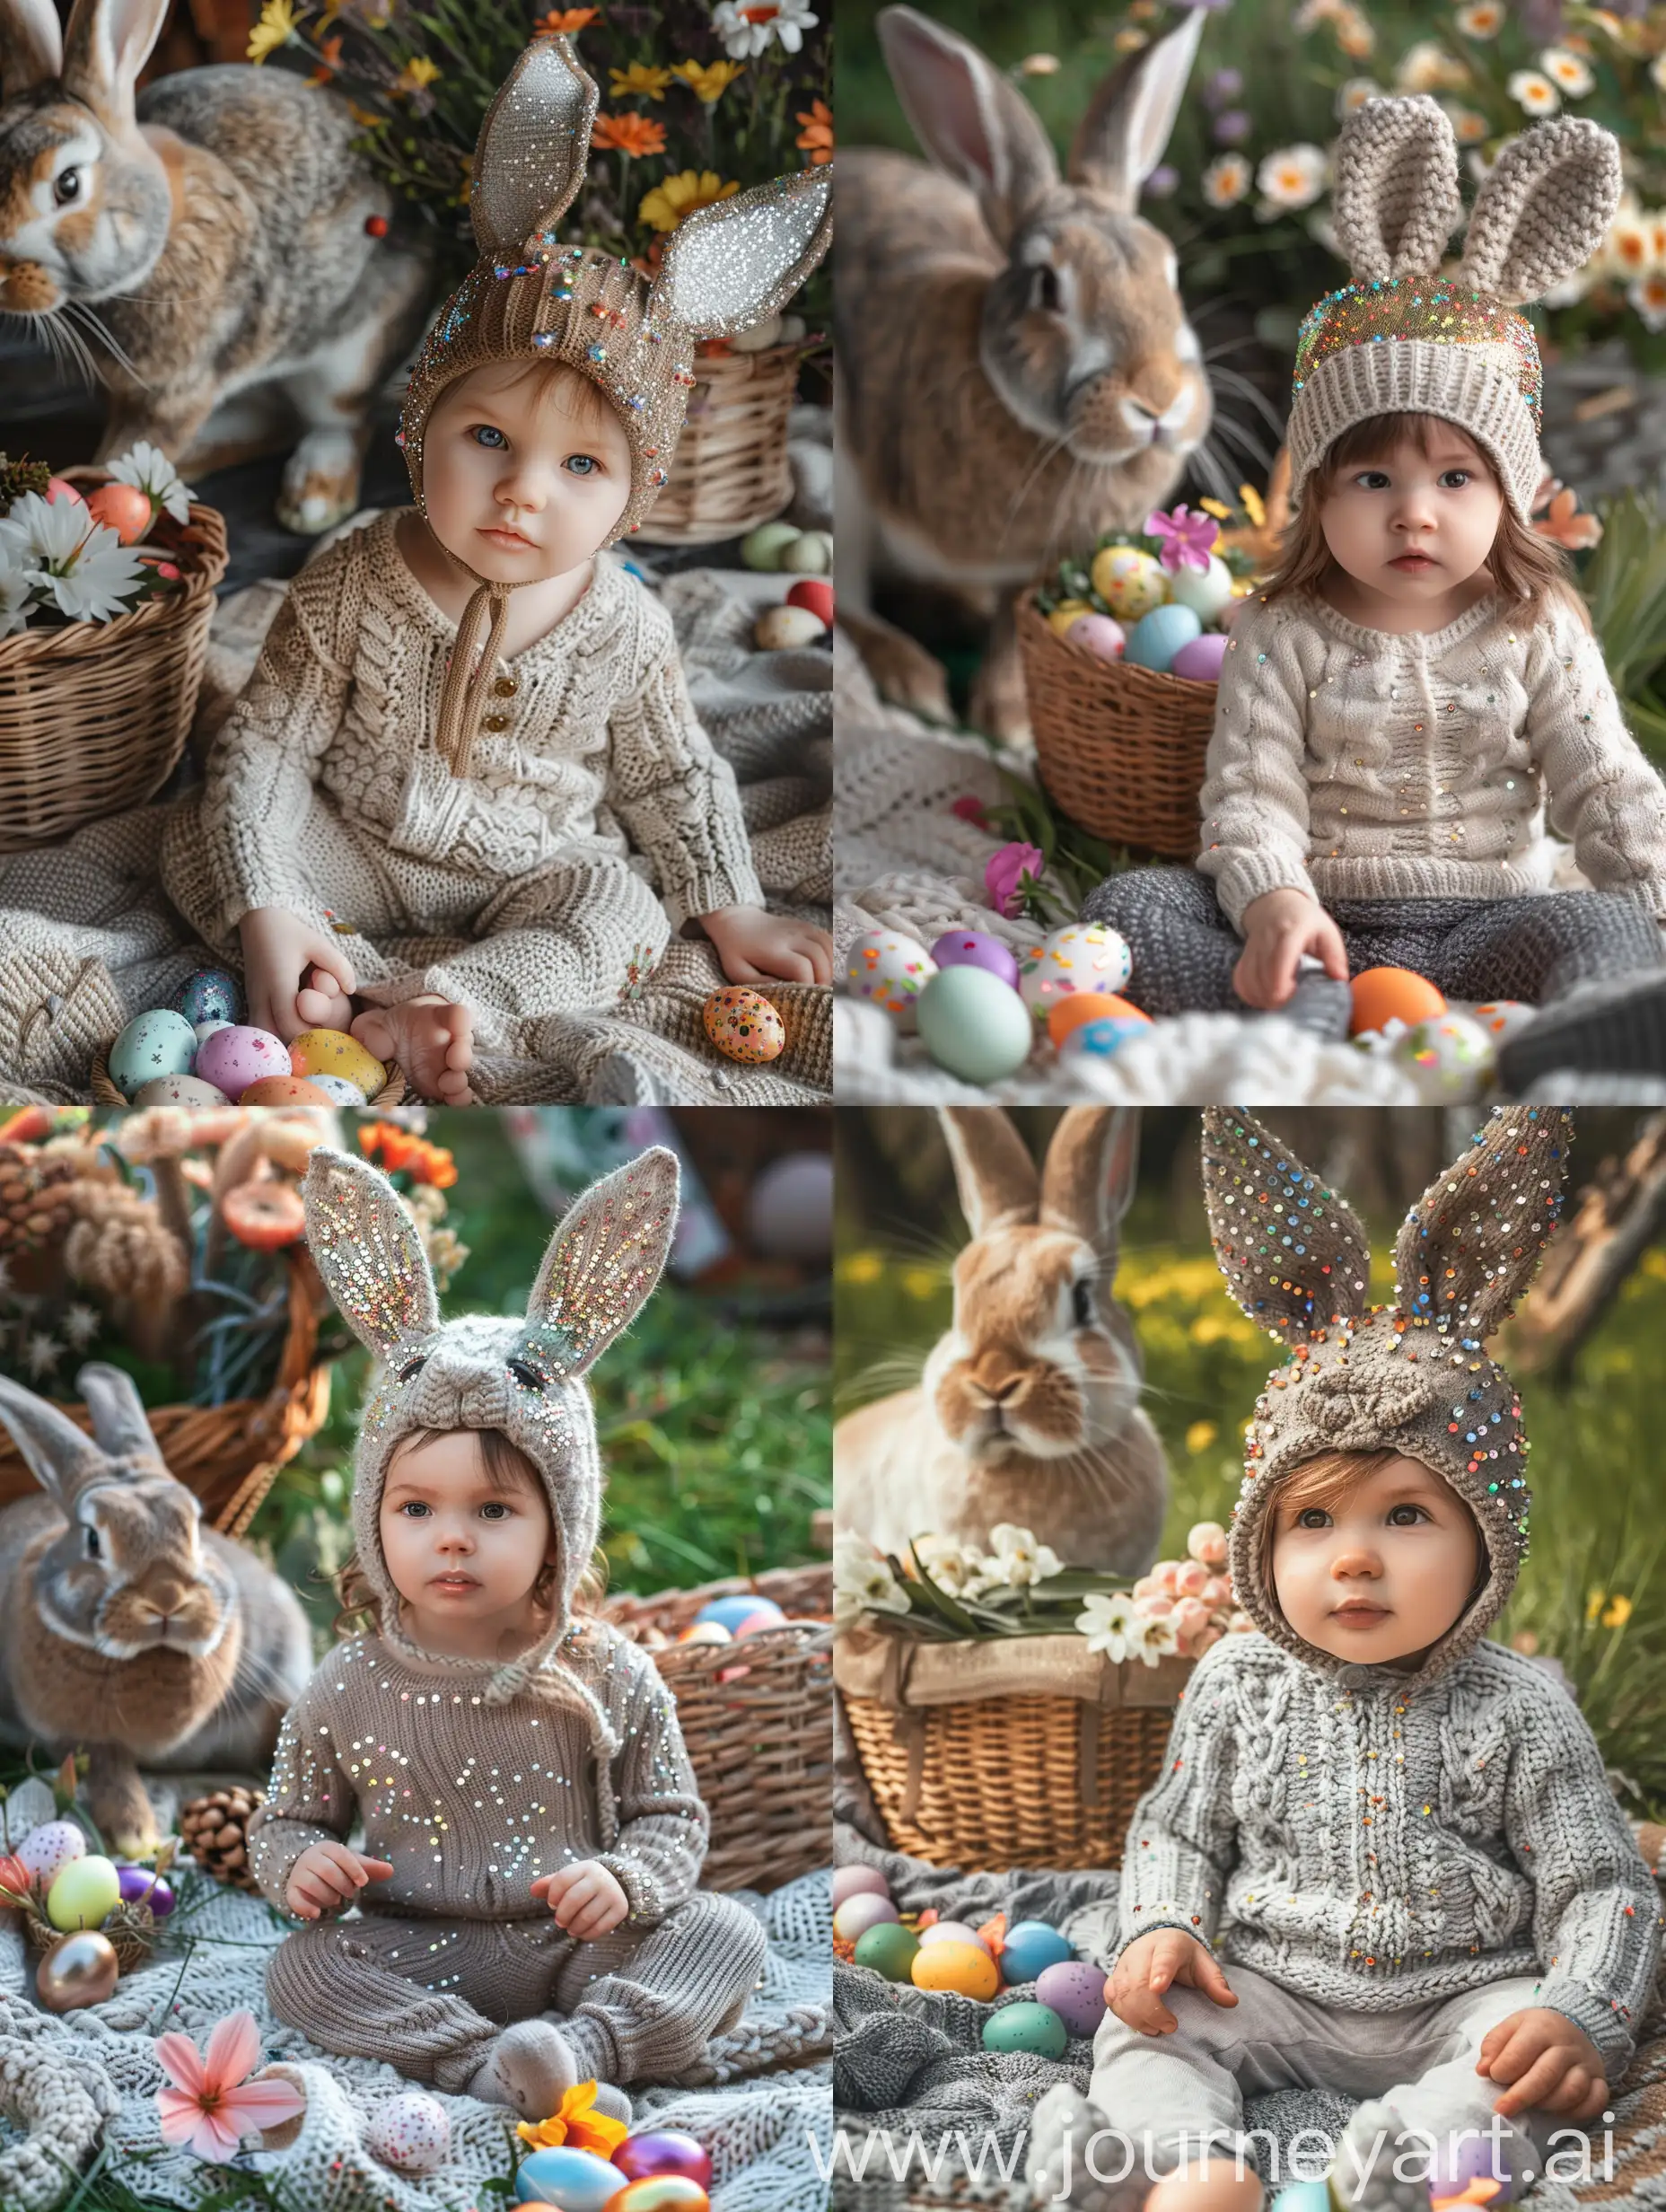 A small child in a cute knitted costume with sequins in a hat with knitted hare ears sits on a blanket , next to a live bunny and lay colorful Easter eggs, a basket of flowers, detail, the child's face looks into the camera directly close-up realistic 32k , professional photo, canon